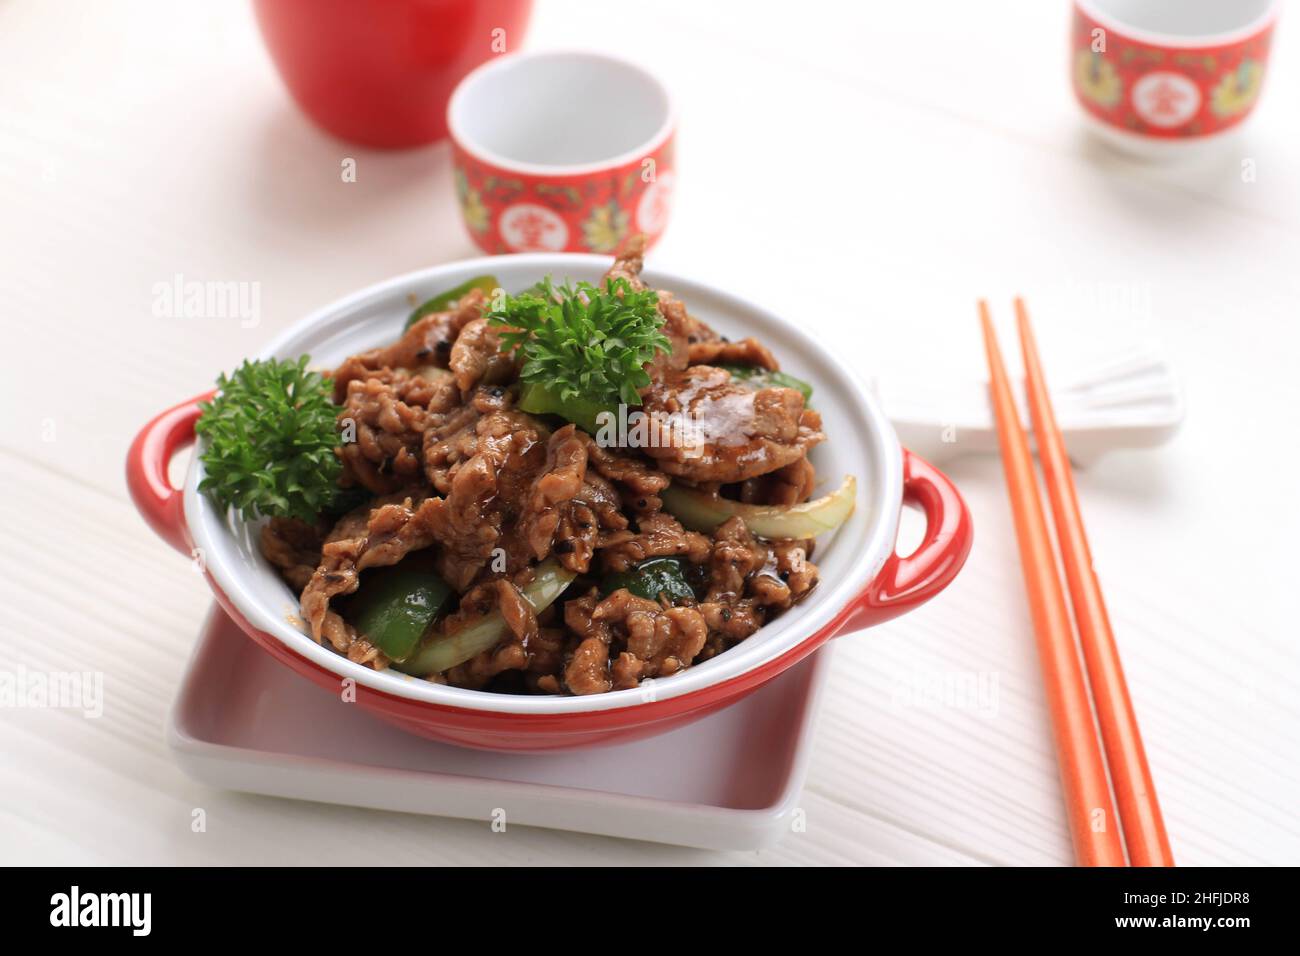 Sapi Lada hitam, Indonesian and Chinese cuisine, stir fried beef with black pepper sauce and red bell peppers, Served on Red Plate Stock Photo